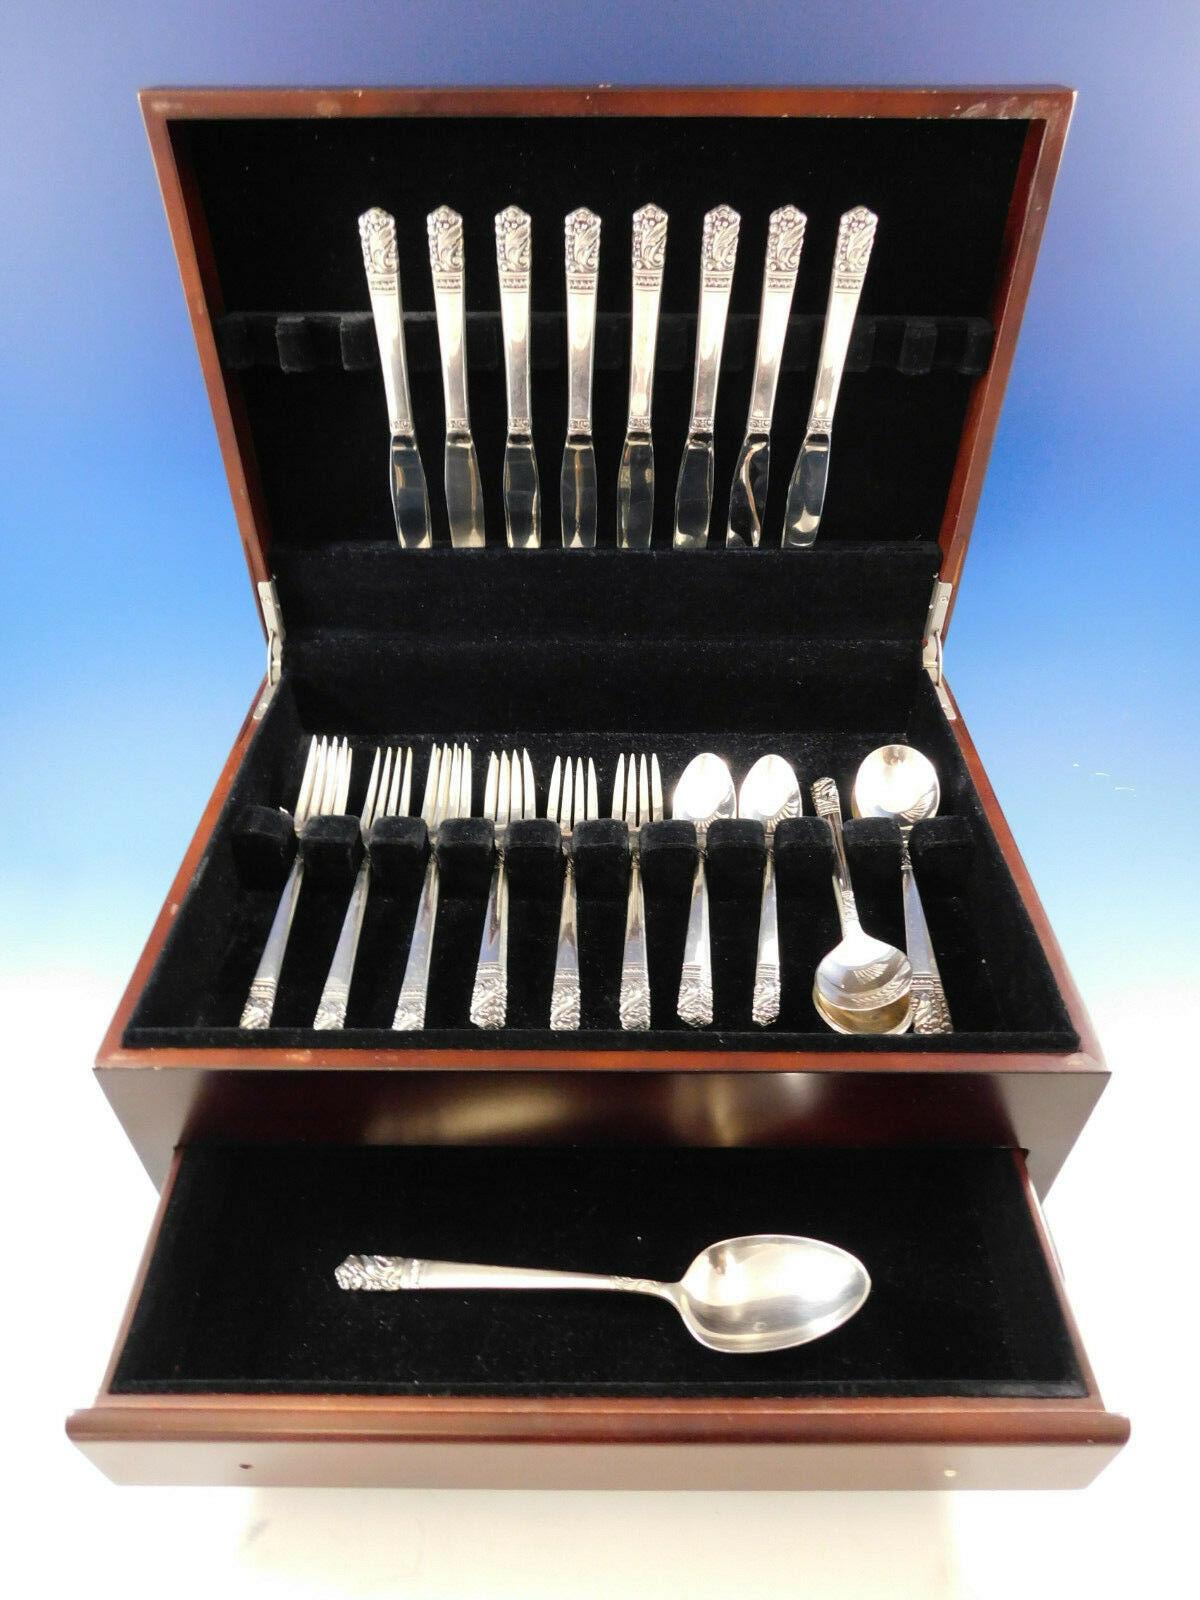 Stunning Mansion House by Heirloom-Oneida sterling silver flatware set of 41 pieces. This set includes:

8 knives, 8 7/8